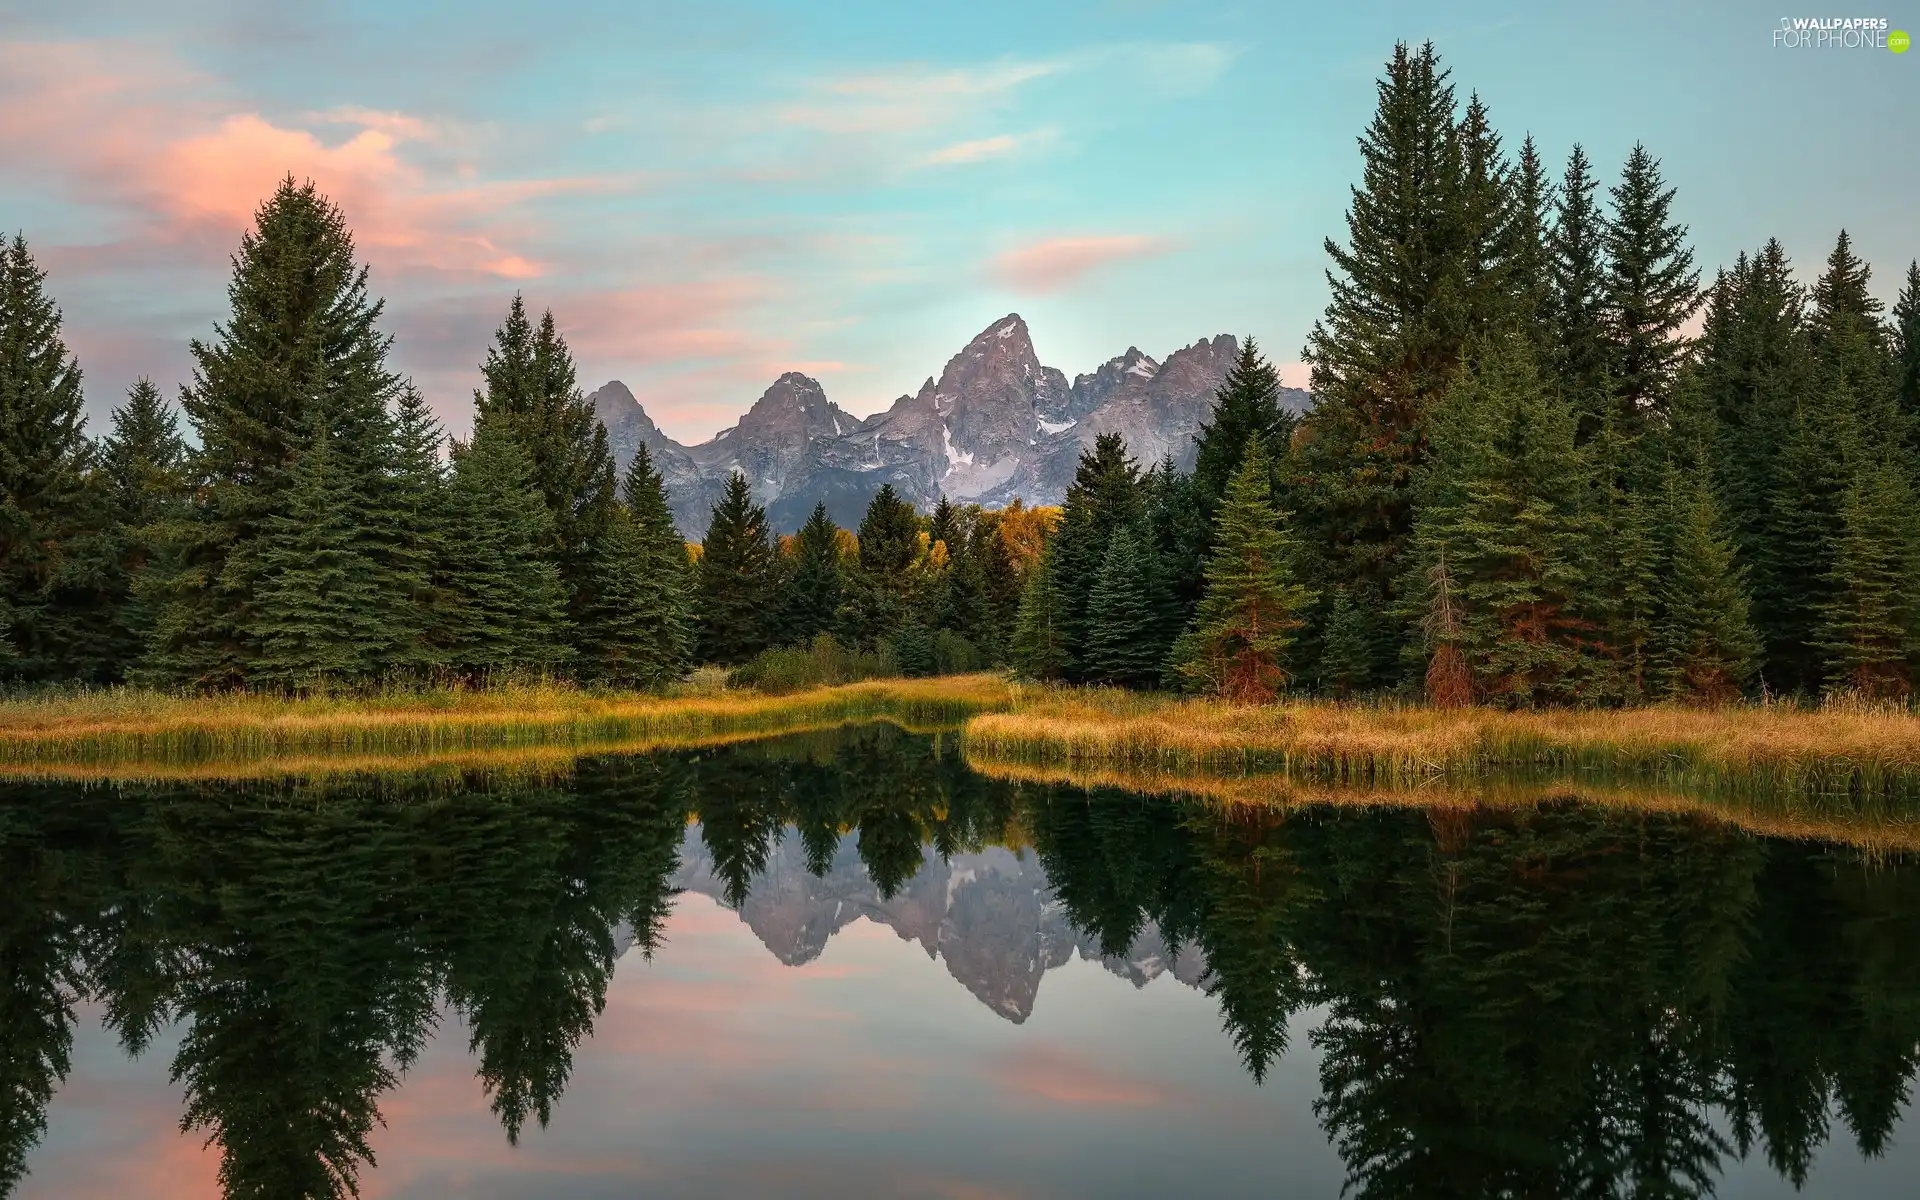 Snake River, Grand Teton National Park, Teton Range Mountains, forest, State of Wyoming, The United States, viewes, reflection, trees